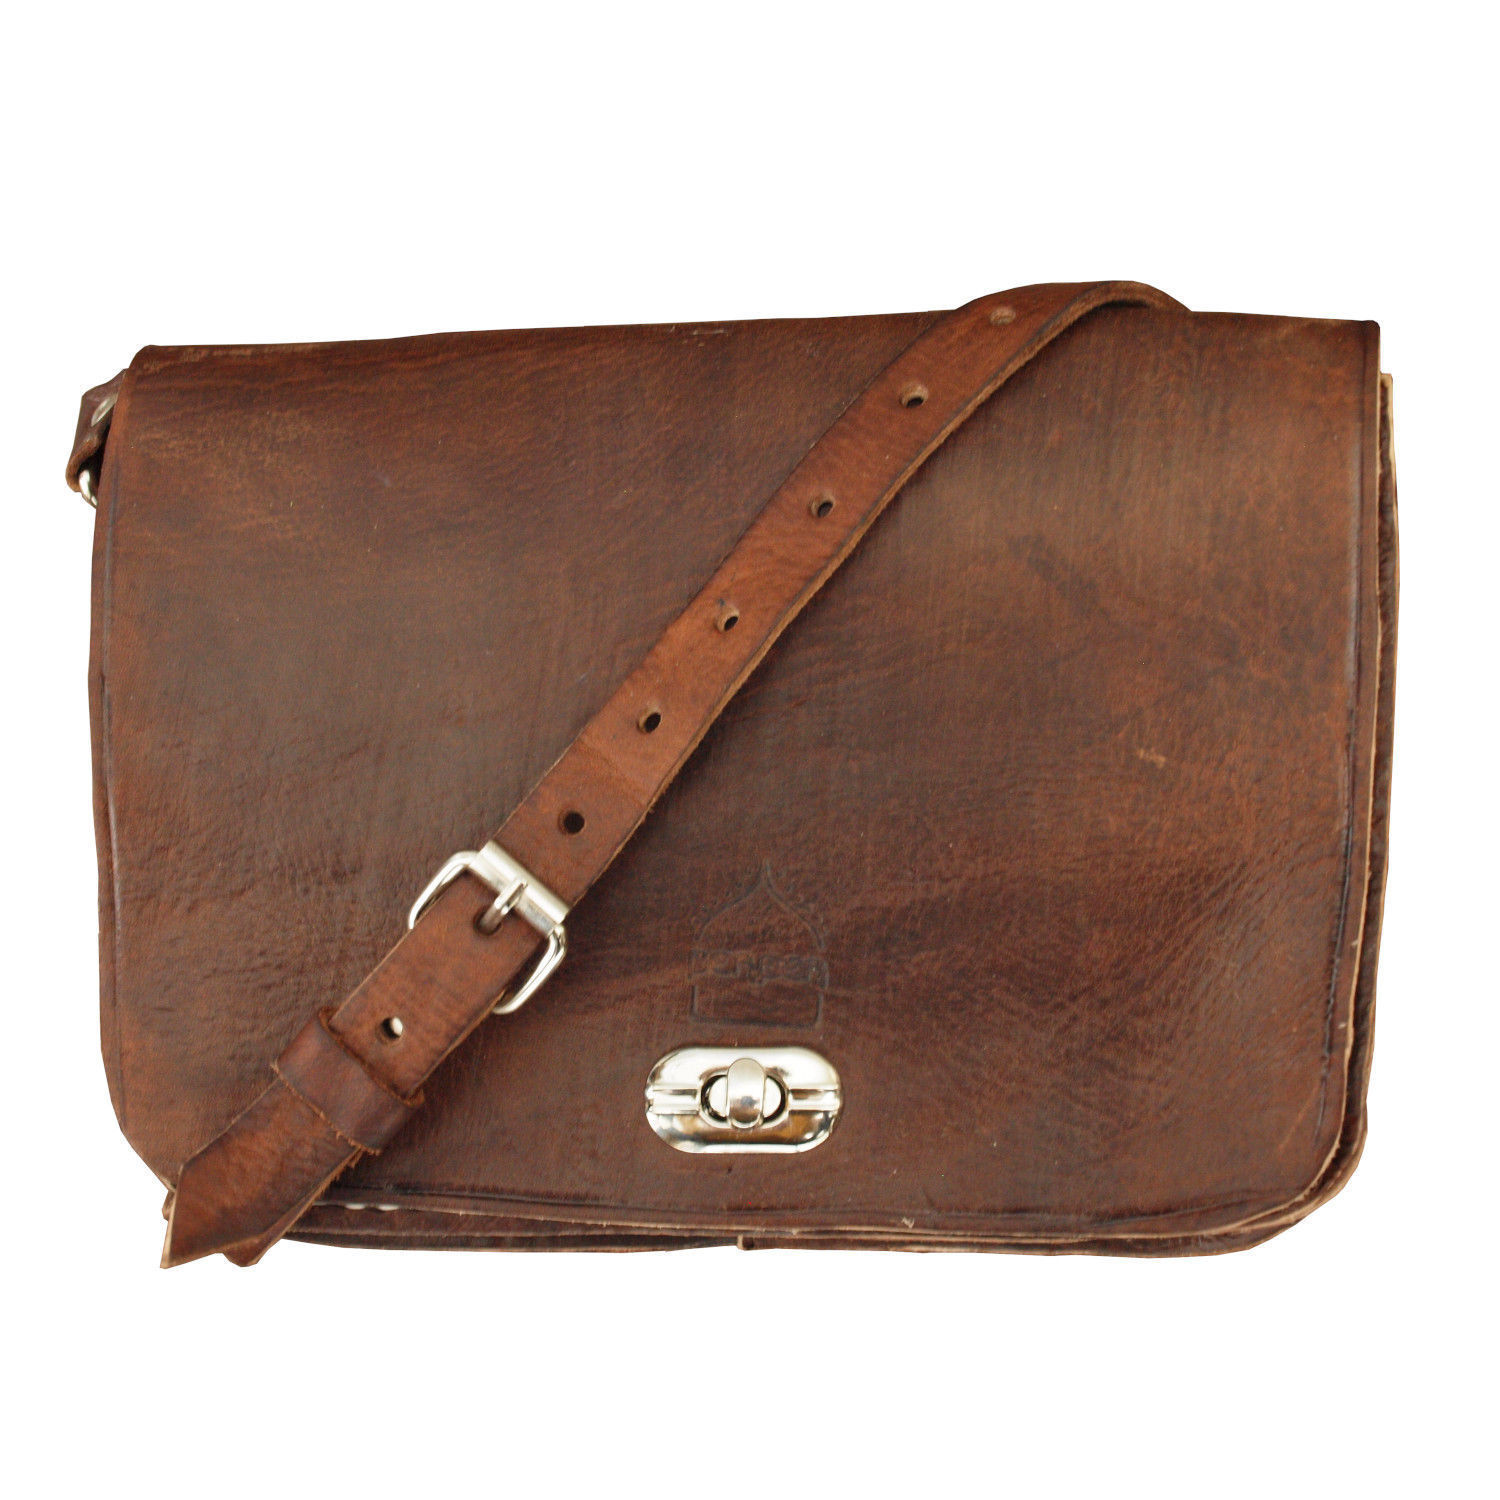 The Kenitra Cross-Body Bag in Dark Brown with Strap on White Background